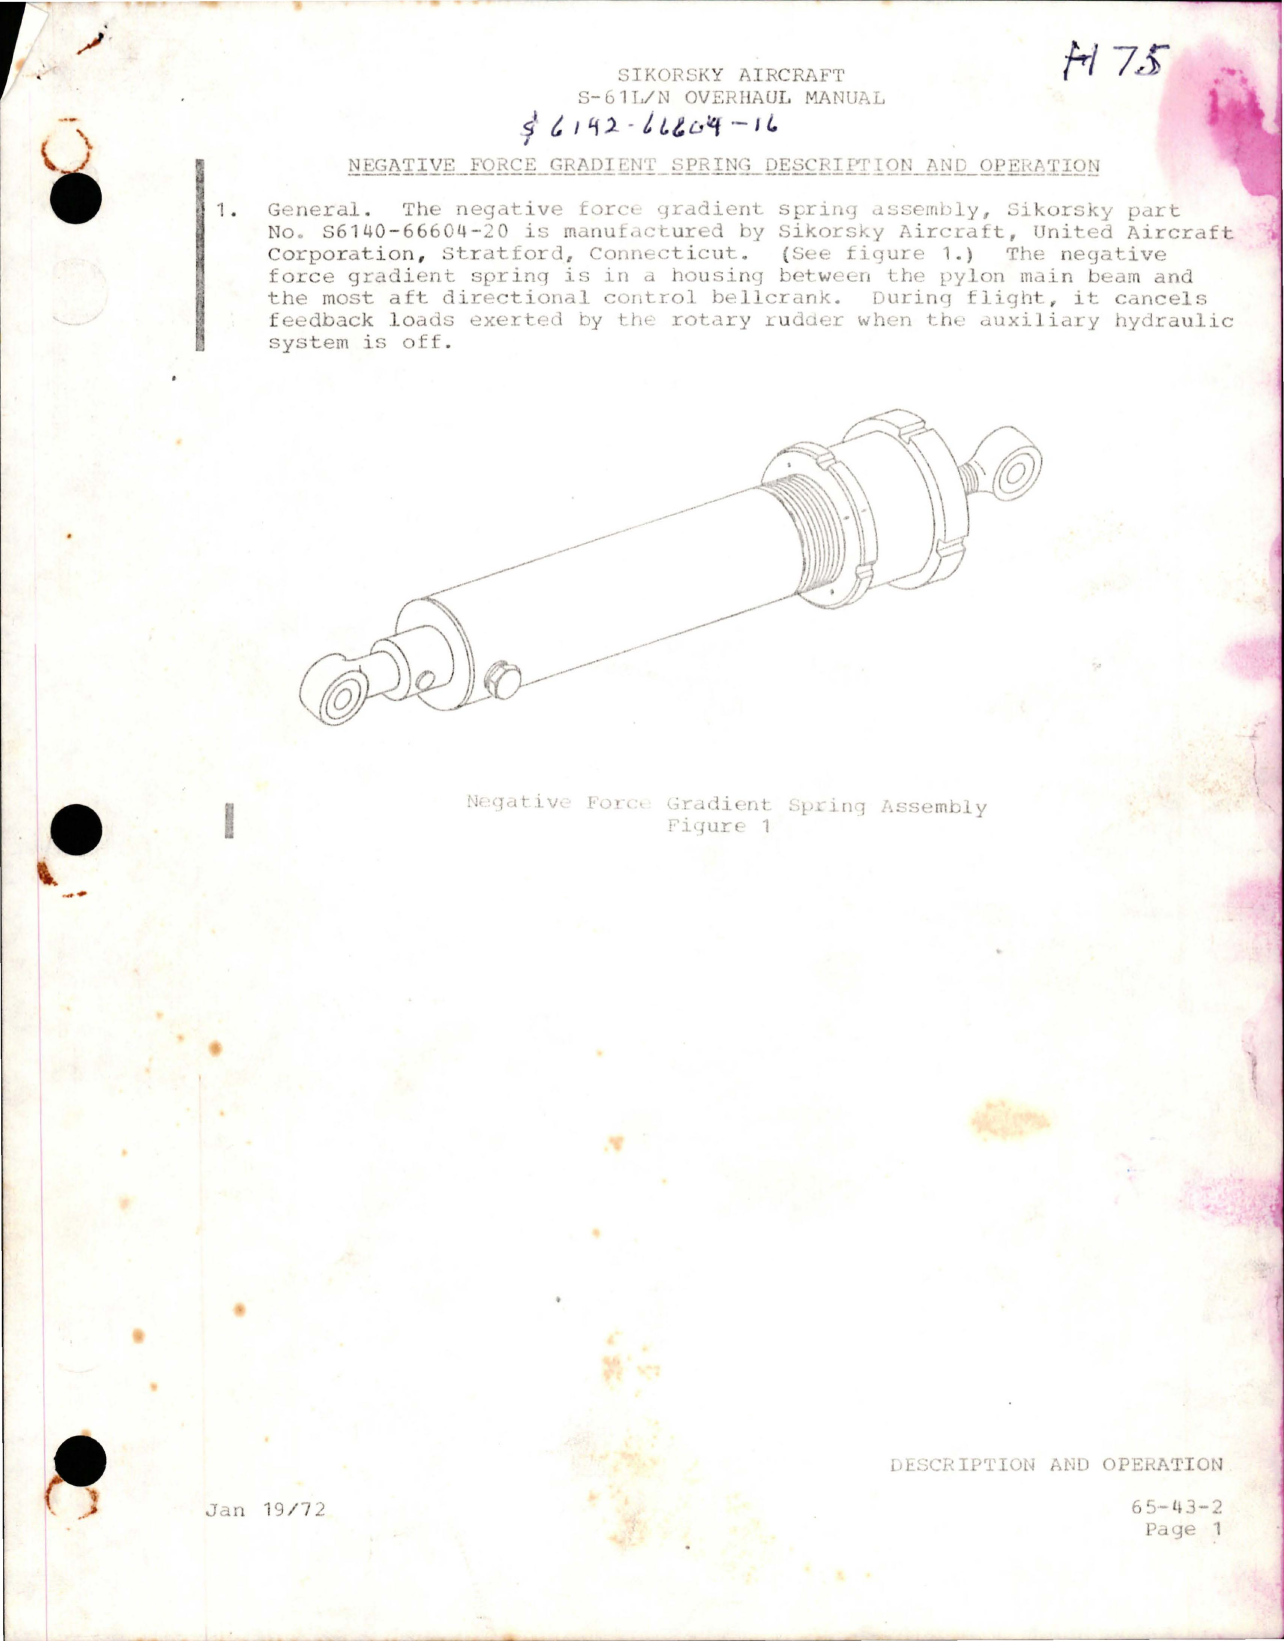 Sample page 1 from AirCorps Library document: Overhaul for Negative Force Gradient Spring Description and Operation - S-61L/N